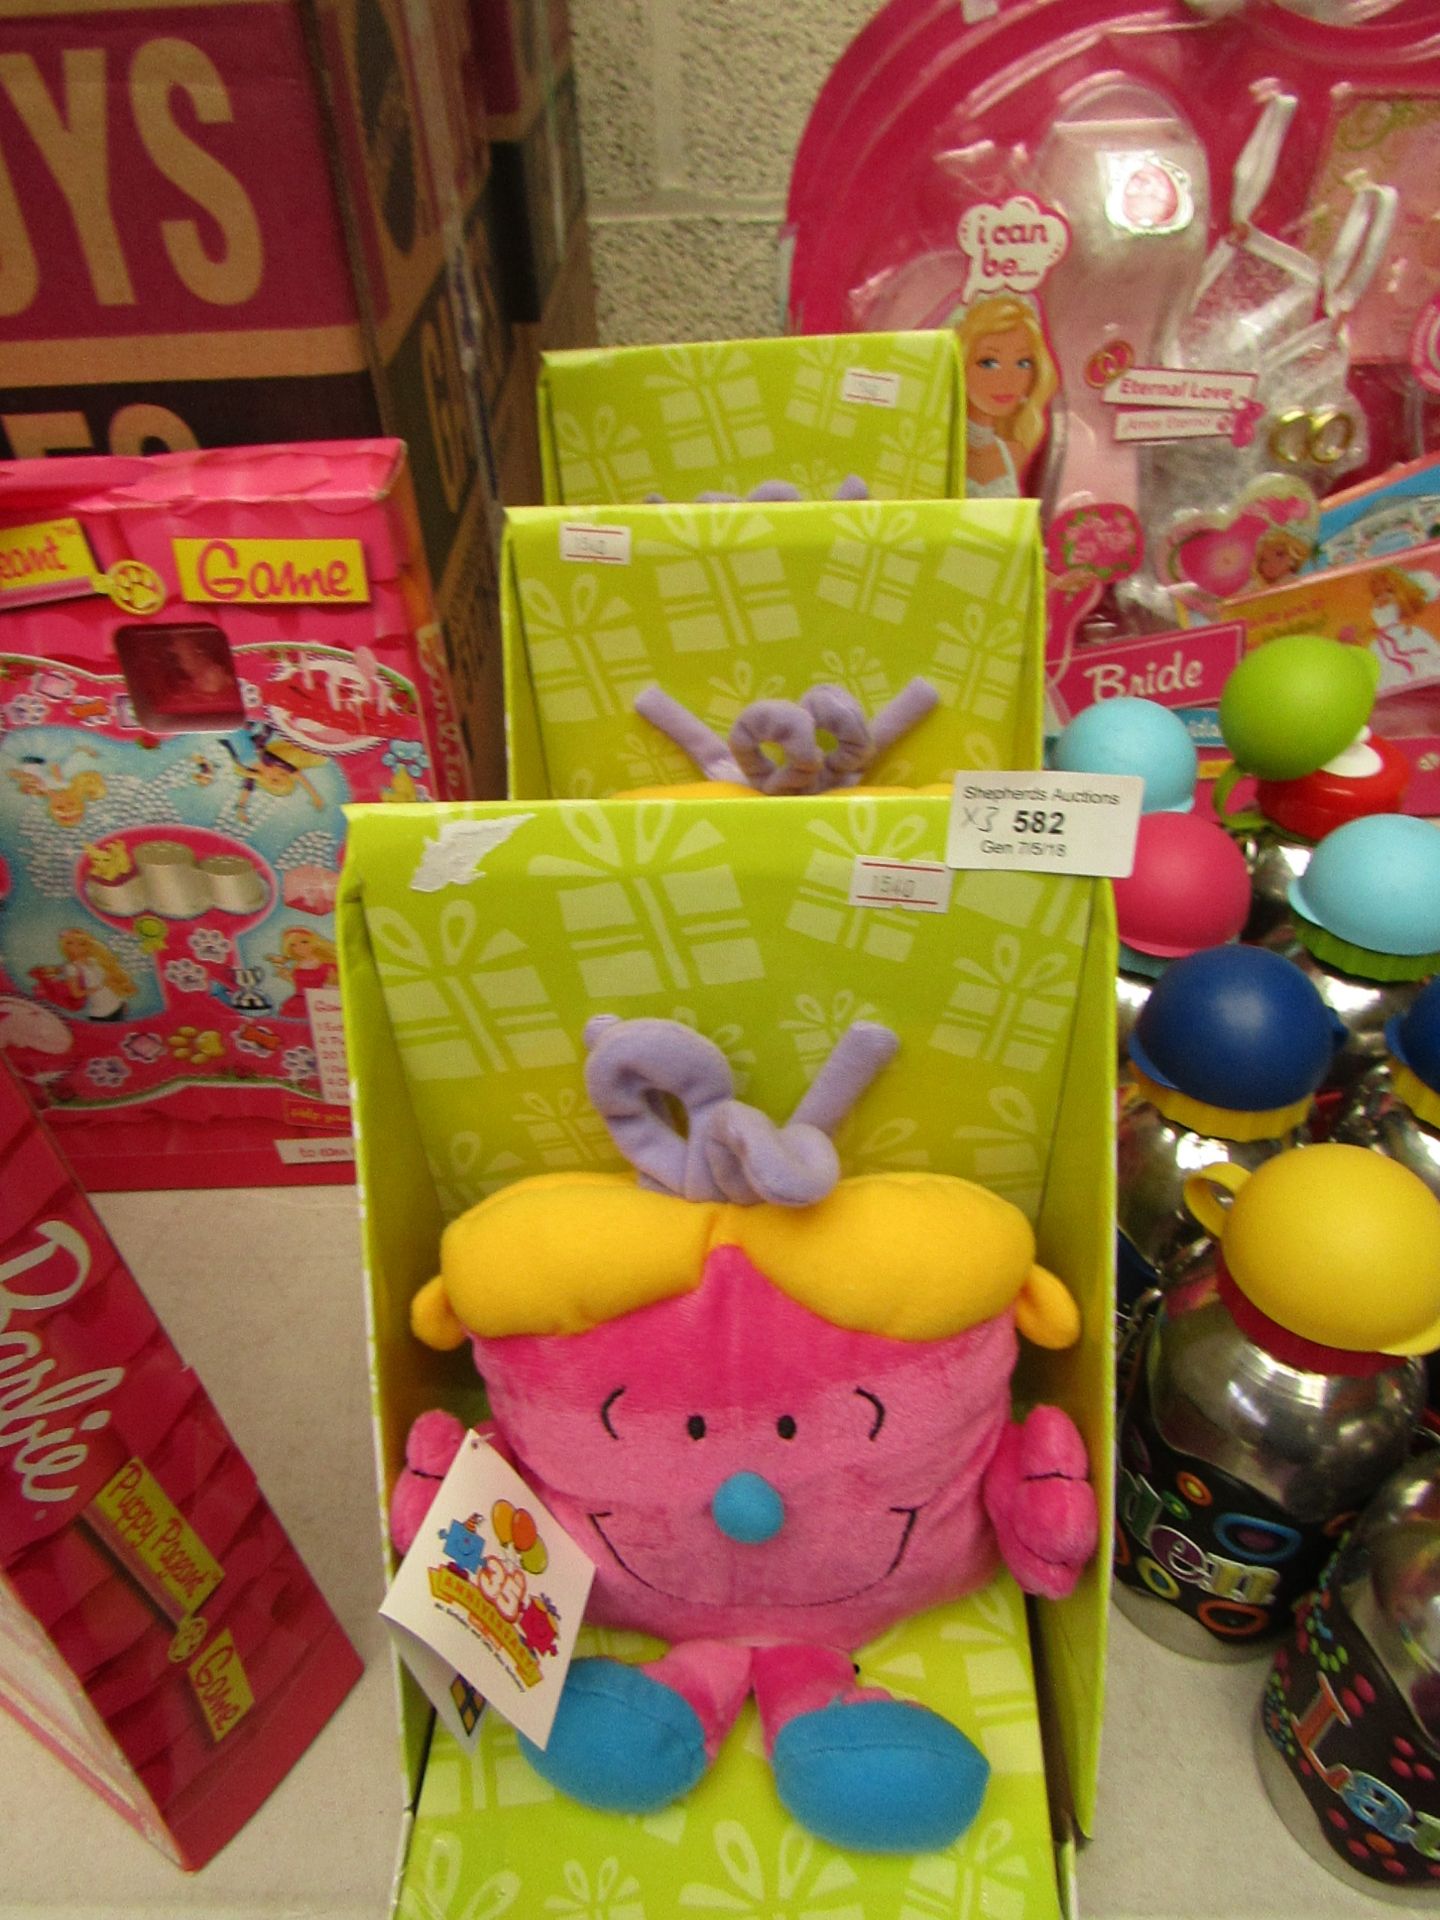 3x Little Miss Birthday toys, all new and packaged.